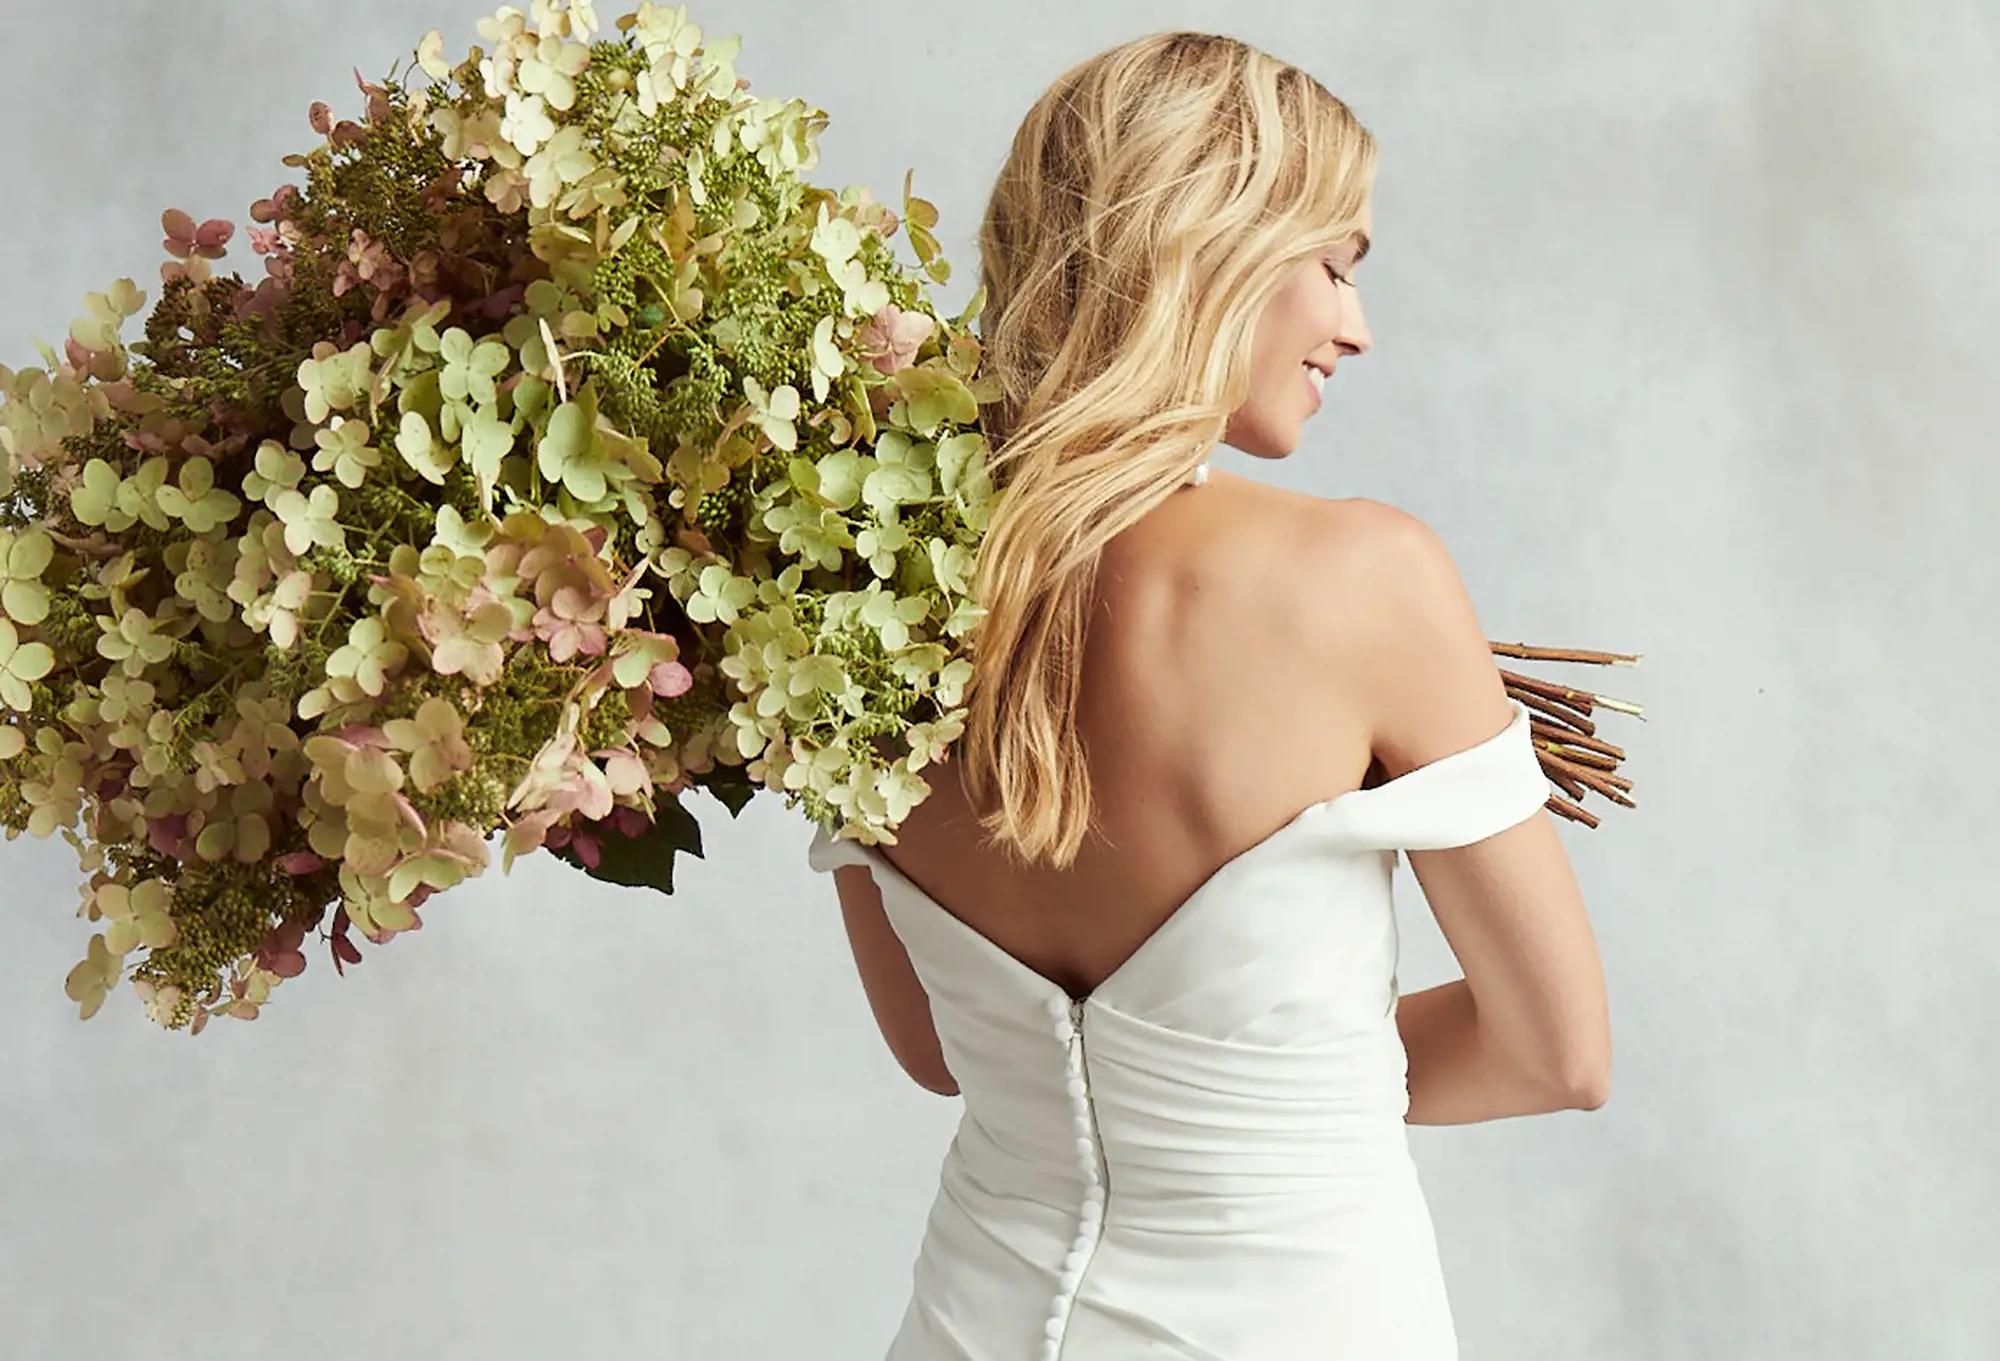 SIMPLE YET CHIC WEDDING DRESSES FOR YOUR INTIMATE CEREMONY Image